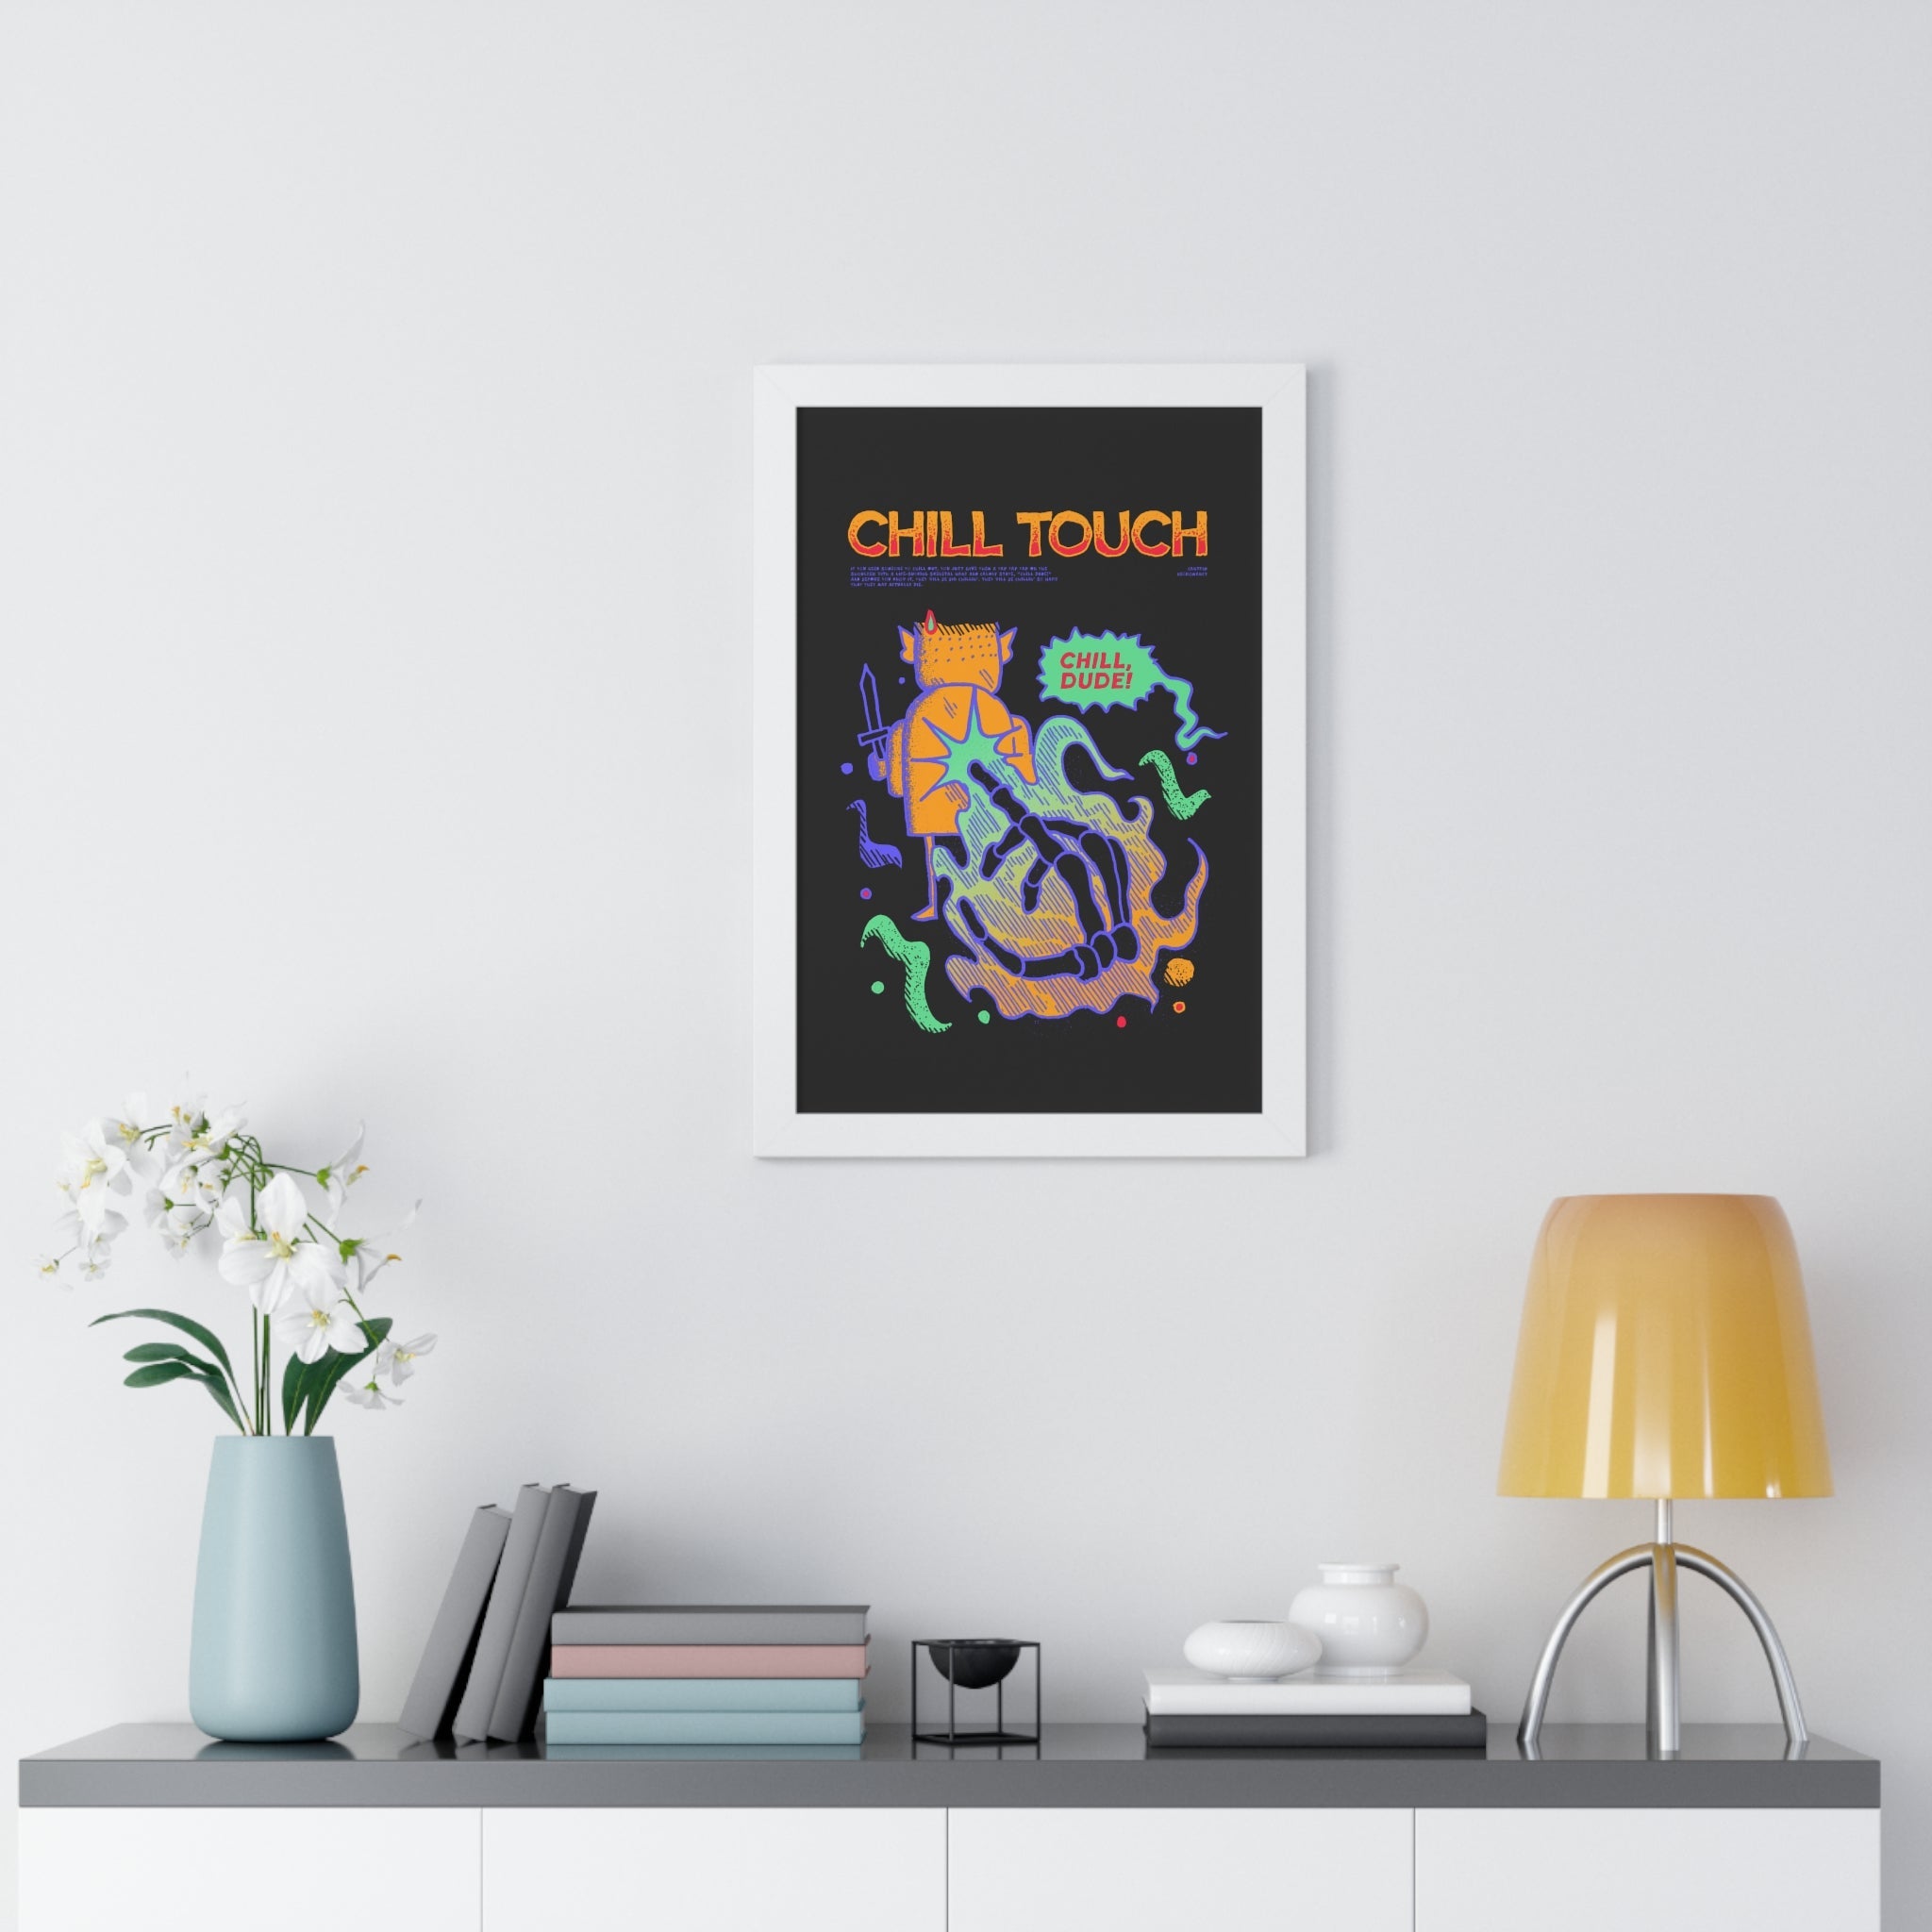 Chill Touch | Framed Poster - Framed Poster - Ace of Gnomes - 19945589518663503901